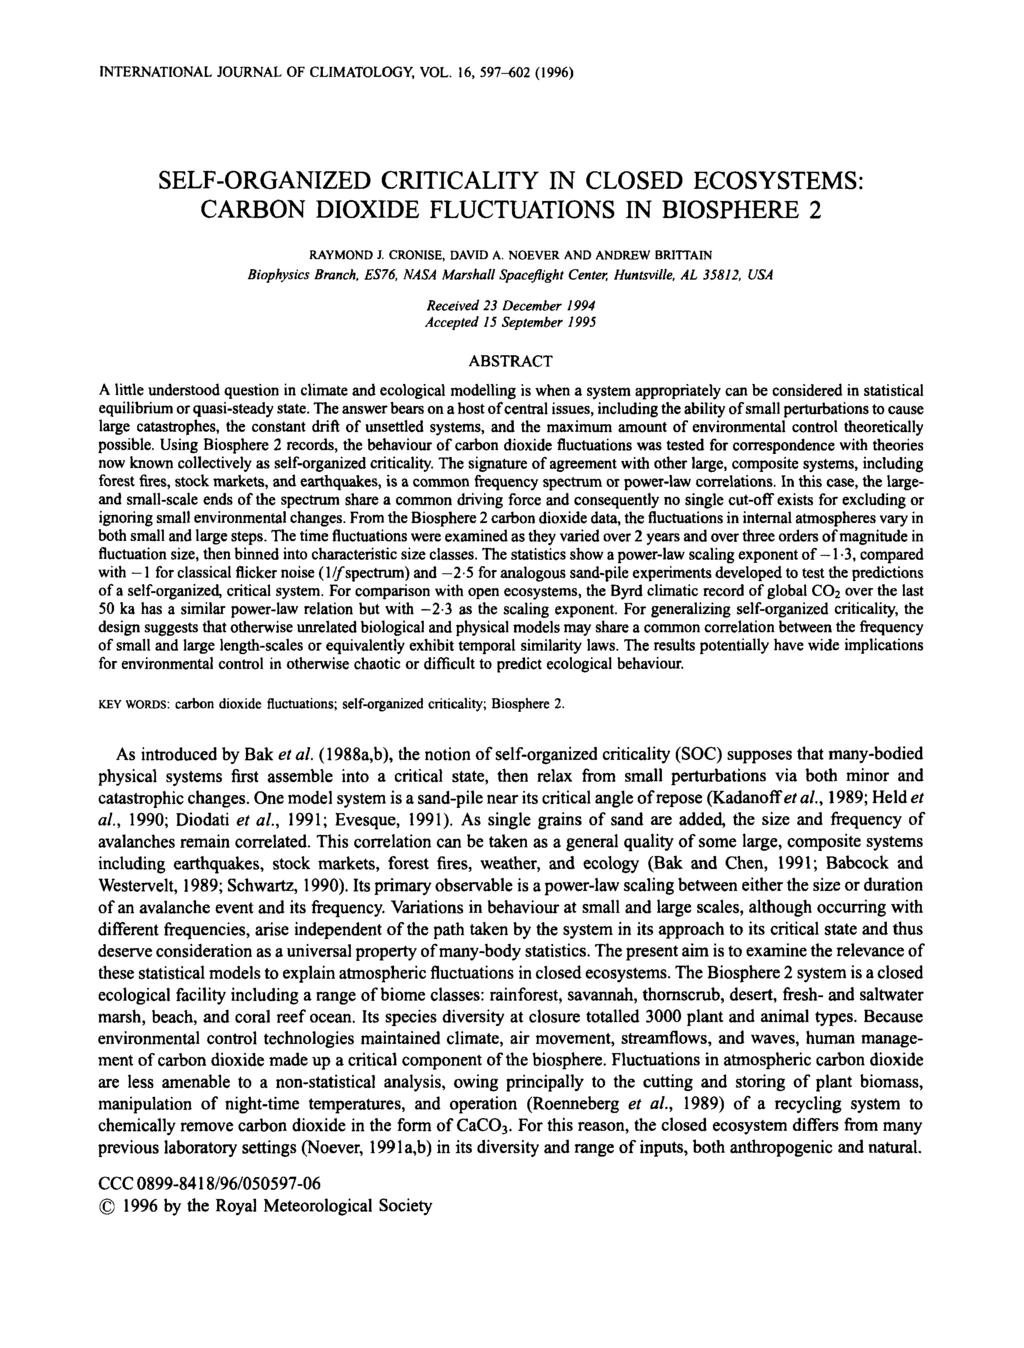 NTERNATIONAL JOURNAL OF CLIMATOLOGY, VOL. 16,597402 (1 996) SELF-ORGANIZED CRITICALITY IN CLOSED ECOSYSTEMS: CARBON DIOXIDE FLUCTUATIONS IN BIOSPHERE 2 RAYMOND J. CRONISE, DAVID A.